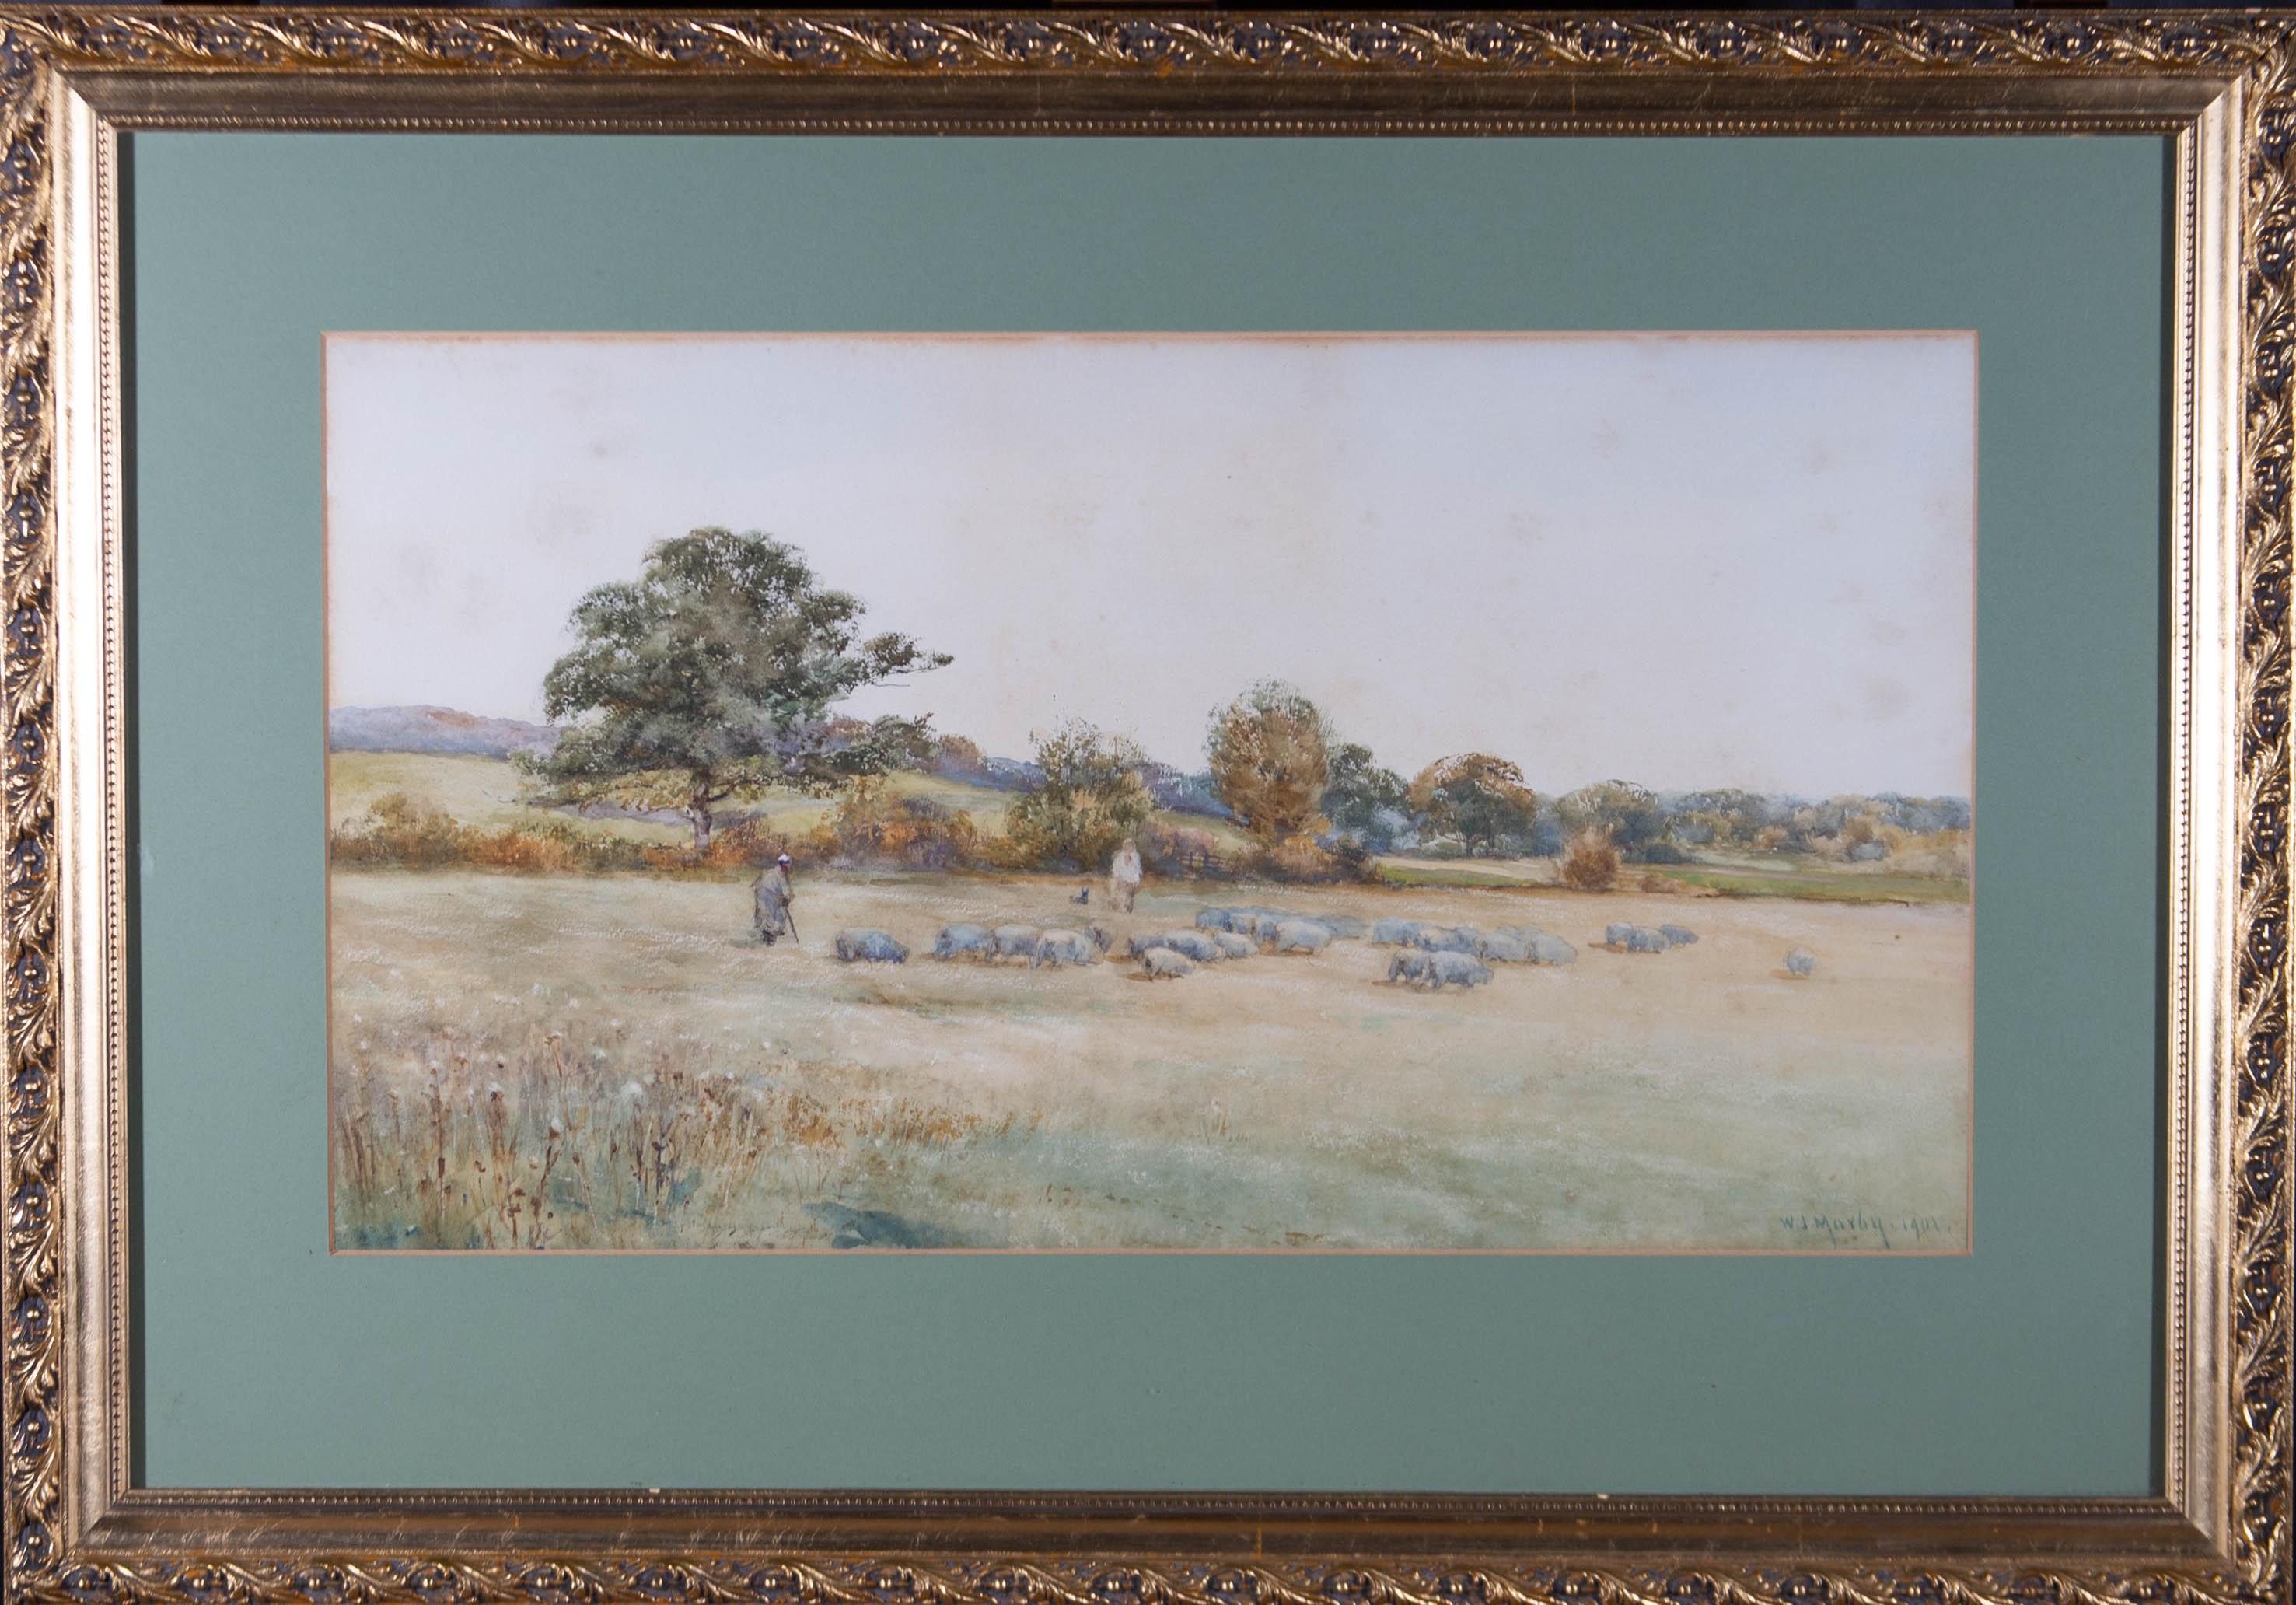 An idyllic pastoral scene showing a farmer driving his flock out into fresh pastures. A figure stands close by with a dog visible in the long grass. The artist has signed and dated to the lower right corner. The painting has been presented in a